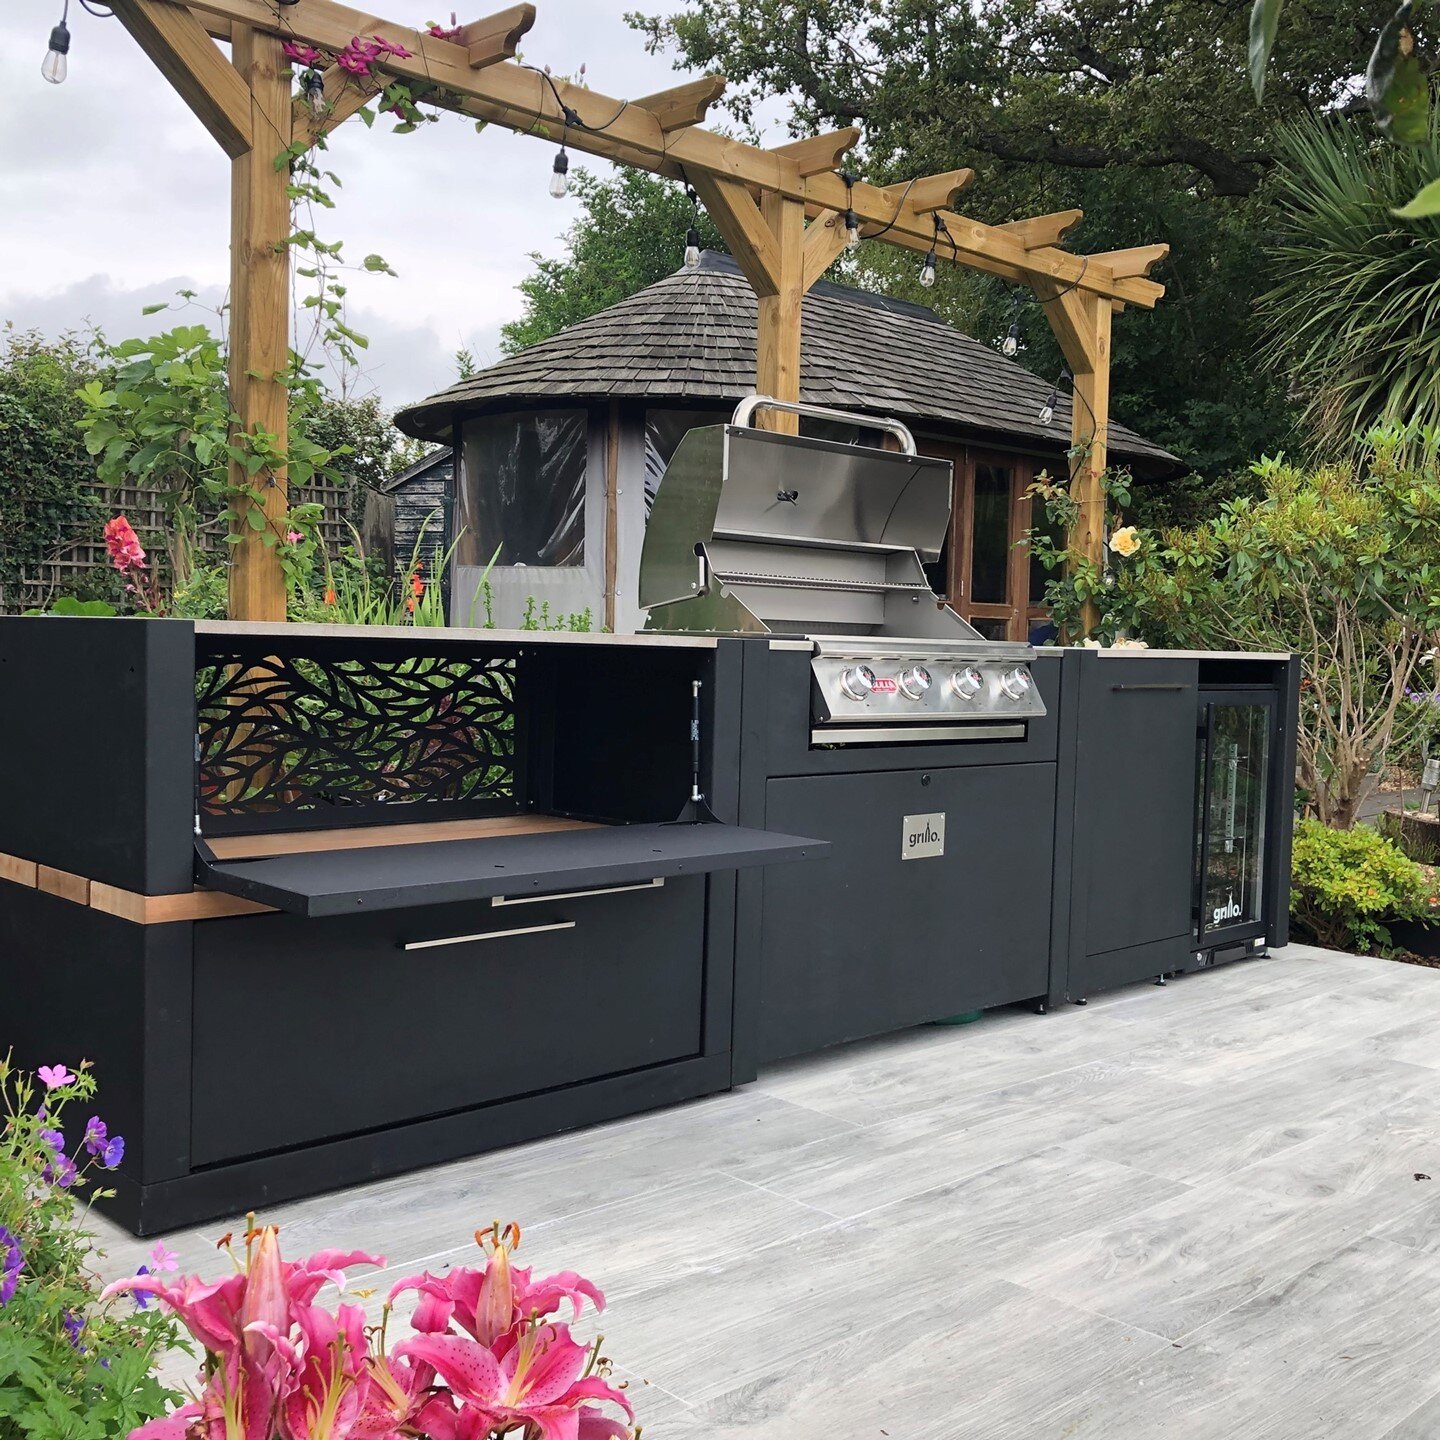 Who wouldn't love this outdoor kitchen! Party ready at a moment's notice.⁠
⁠
This design comprises of 3 Vantage units; two cupboard unit, a gas bbq unit and then the fabulous bin/fridge unit. ⁠
⁠
Love how it's settled into this beautifully kept garde